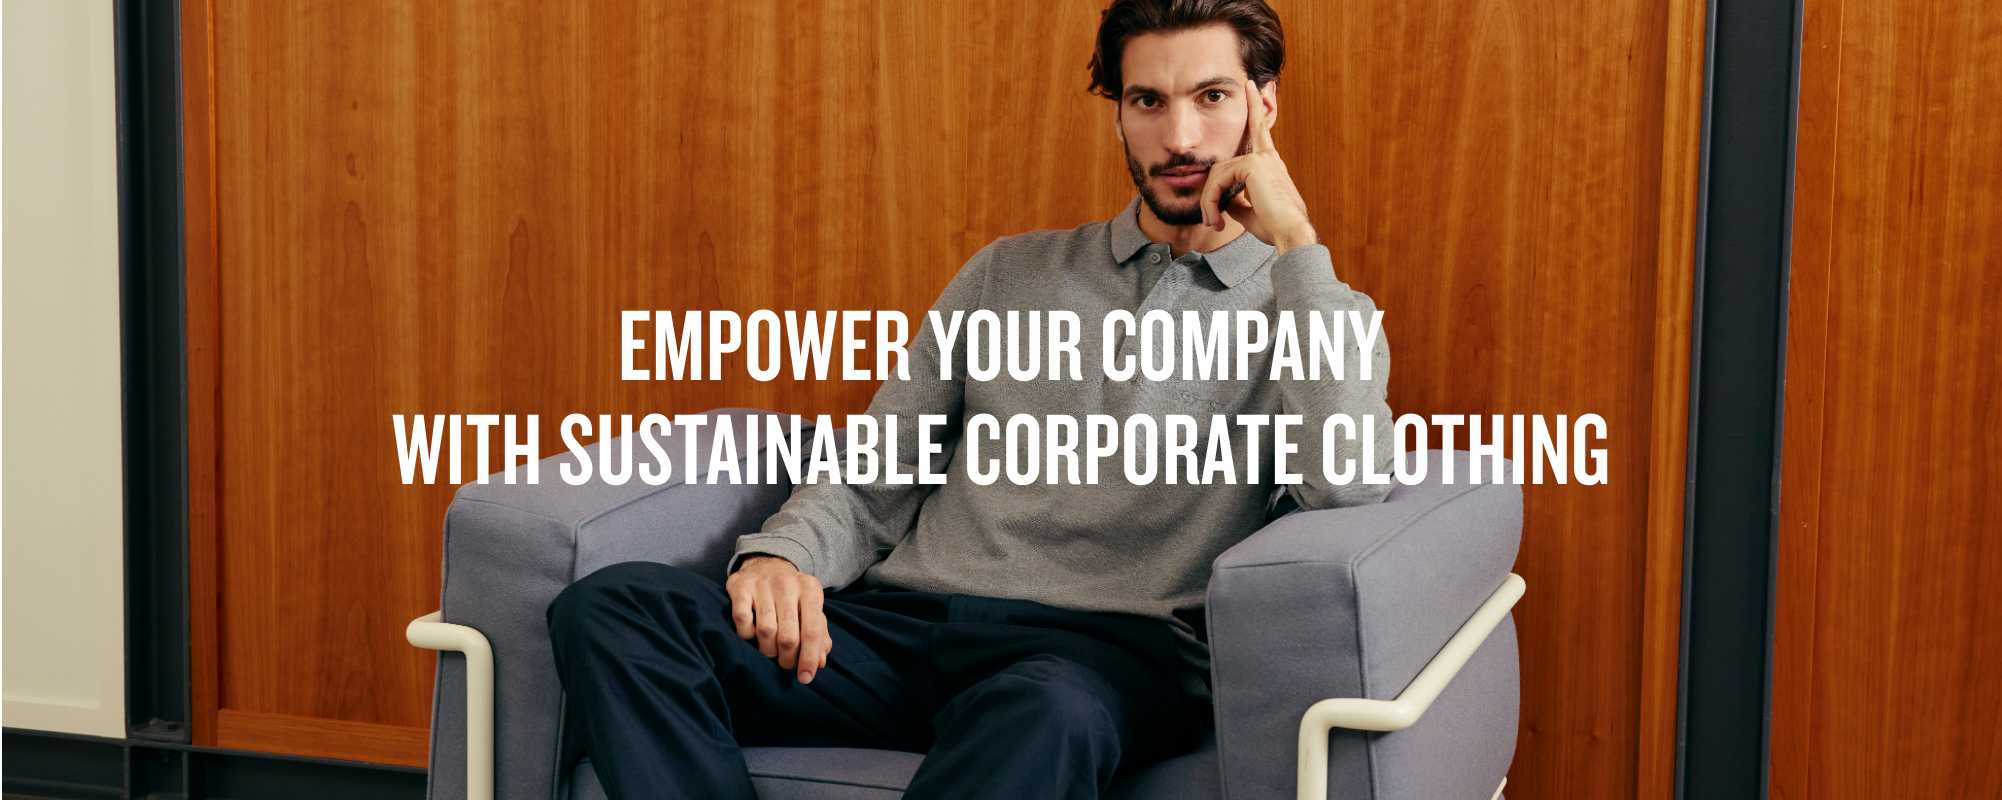 Empower your company